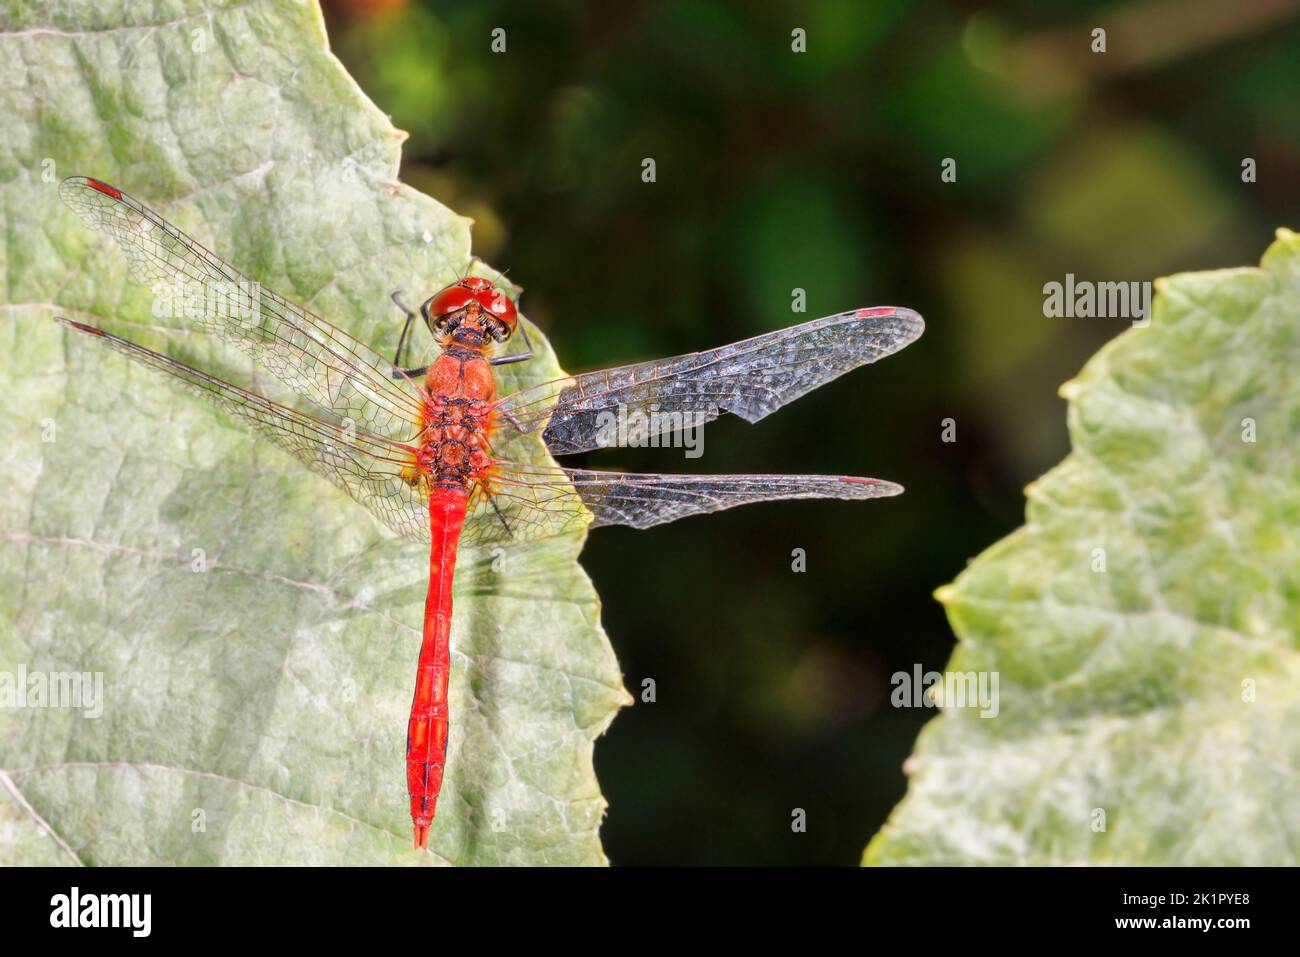 Close-up of a red dragonfly with spreading transparent wings resting on green blurred leaves in the wild. Top view, copy space. Stock Photo